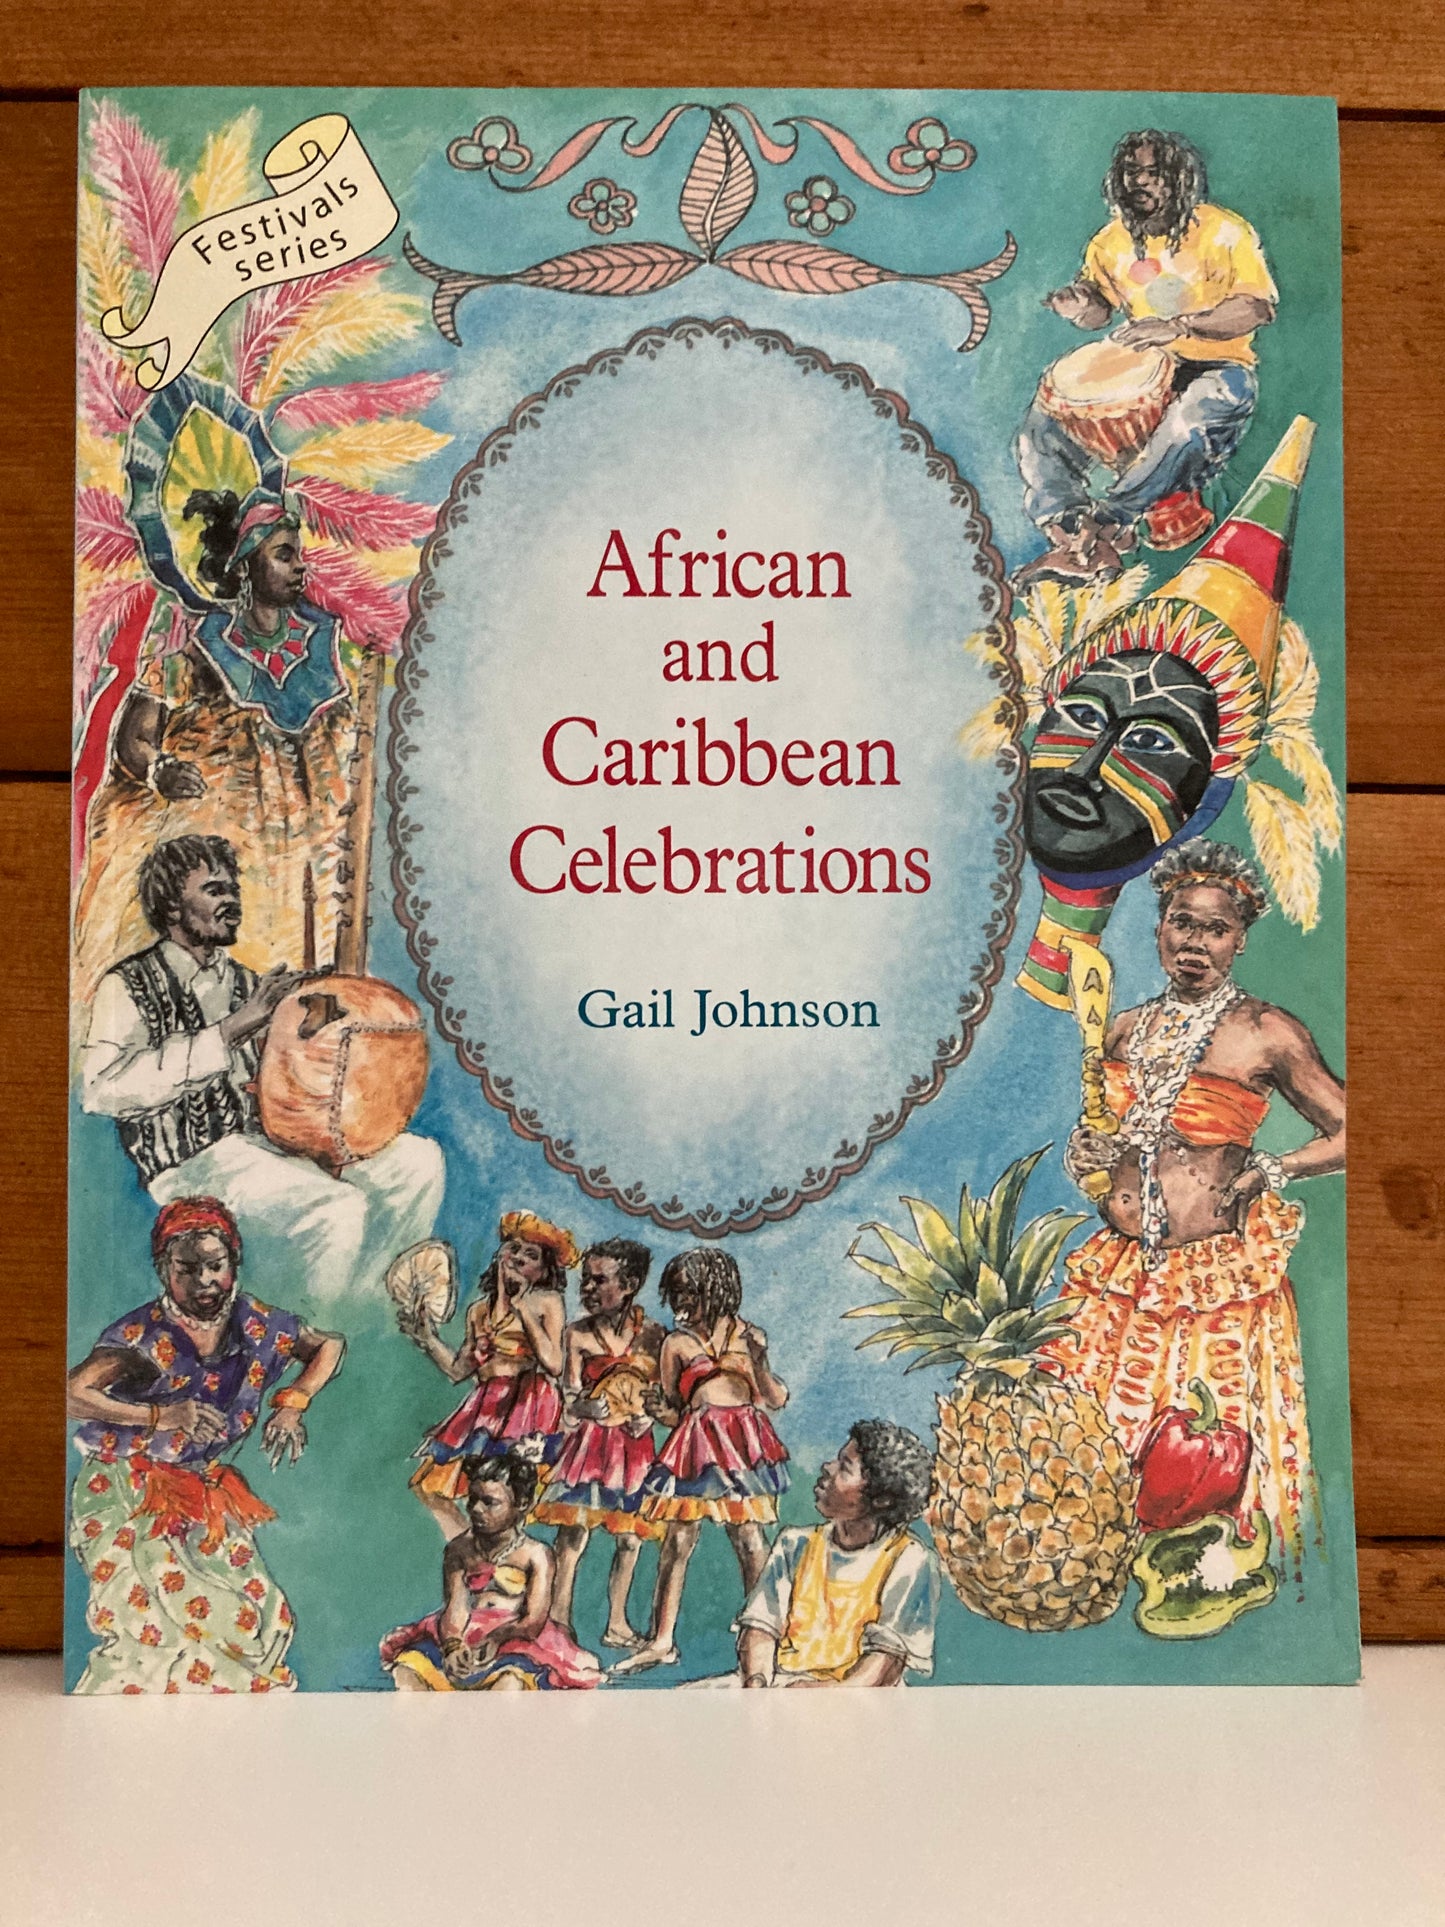 Parenting Resource Book - AFRICAN AND CARRIBEAN CELEBRATIONS